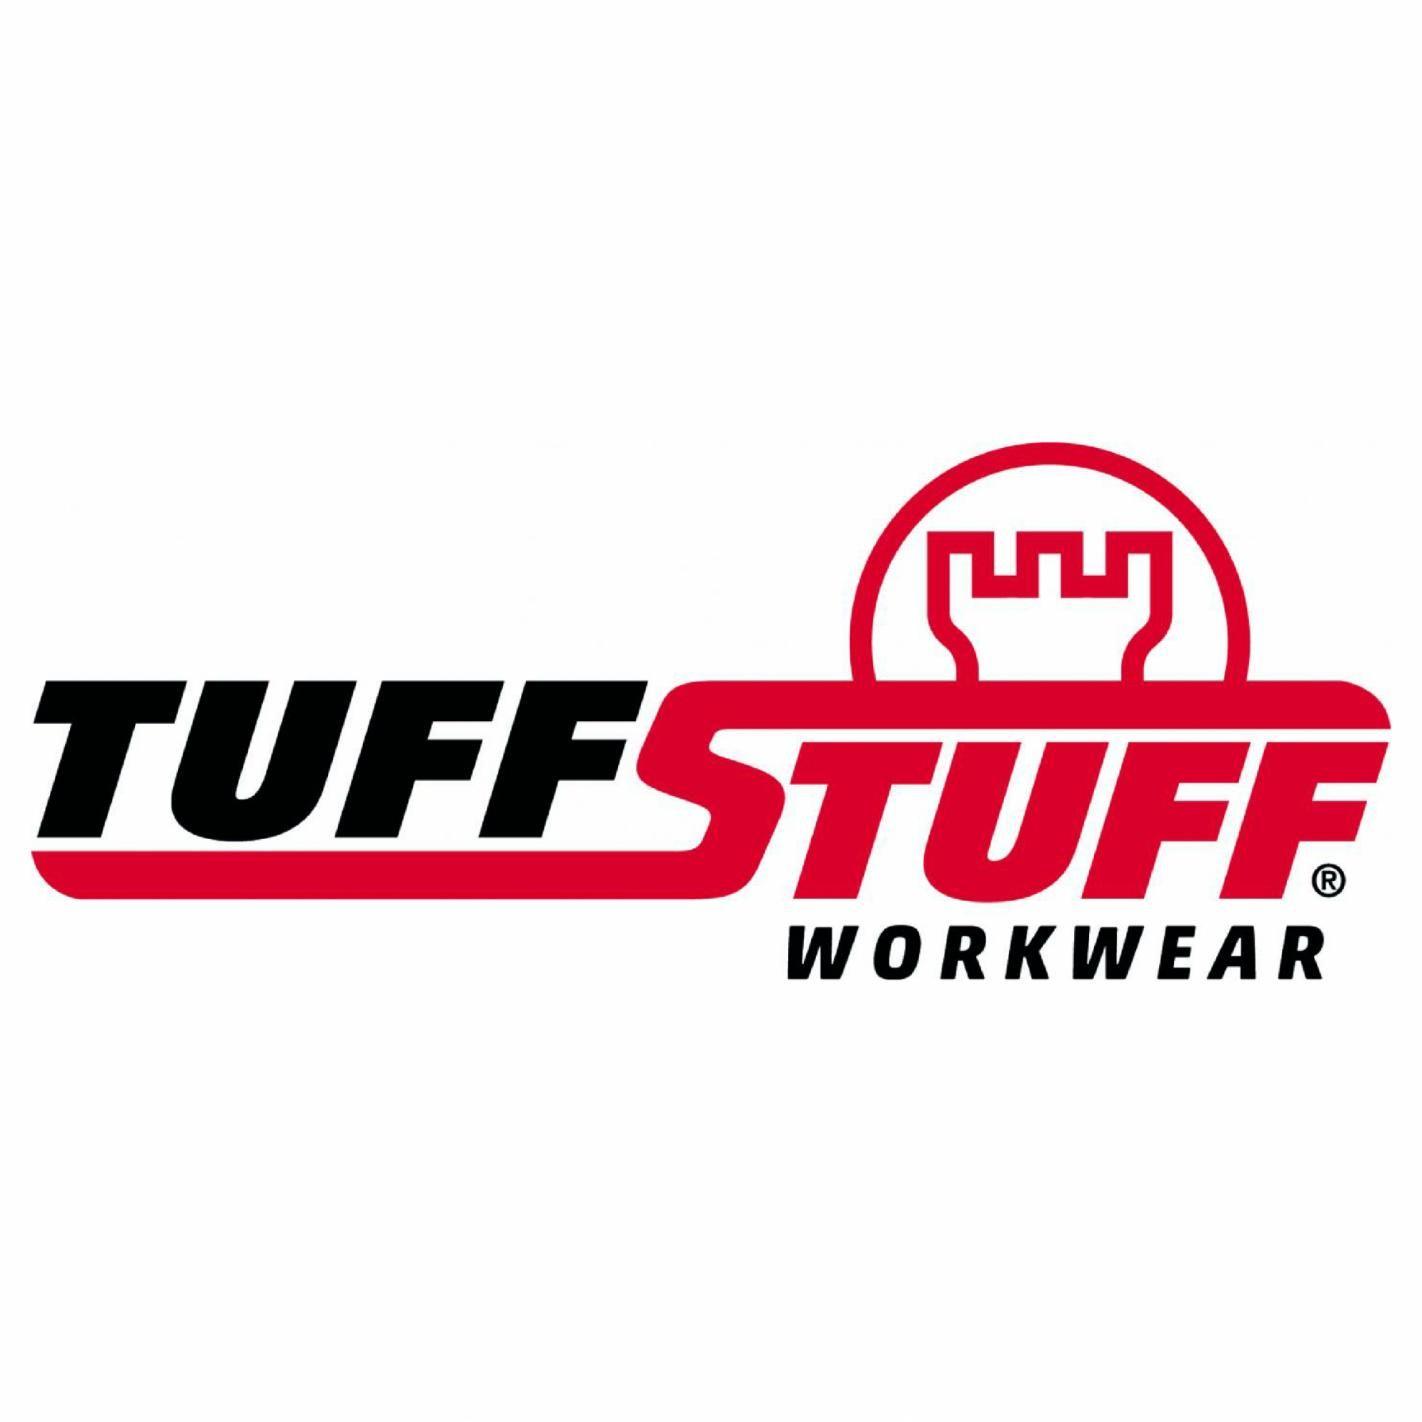 Workwear Logo - Home Page - Cottonmount Group